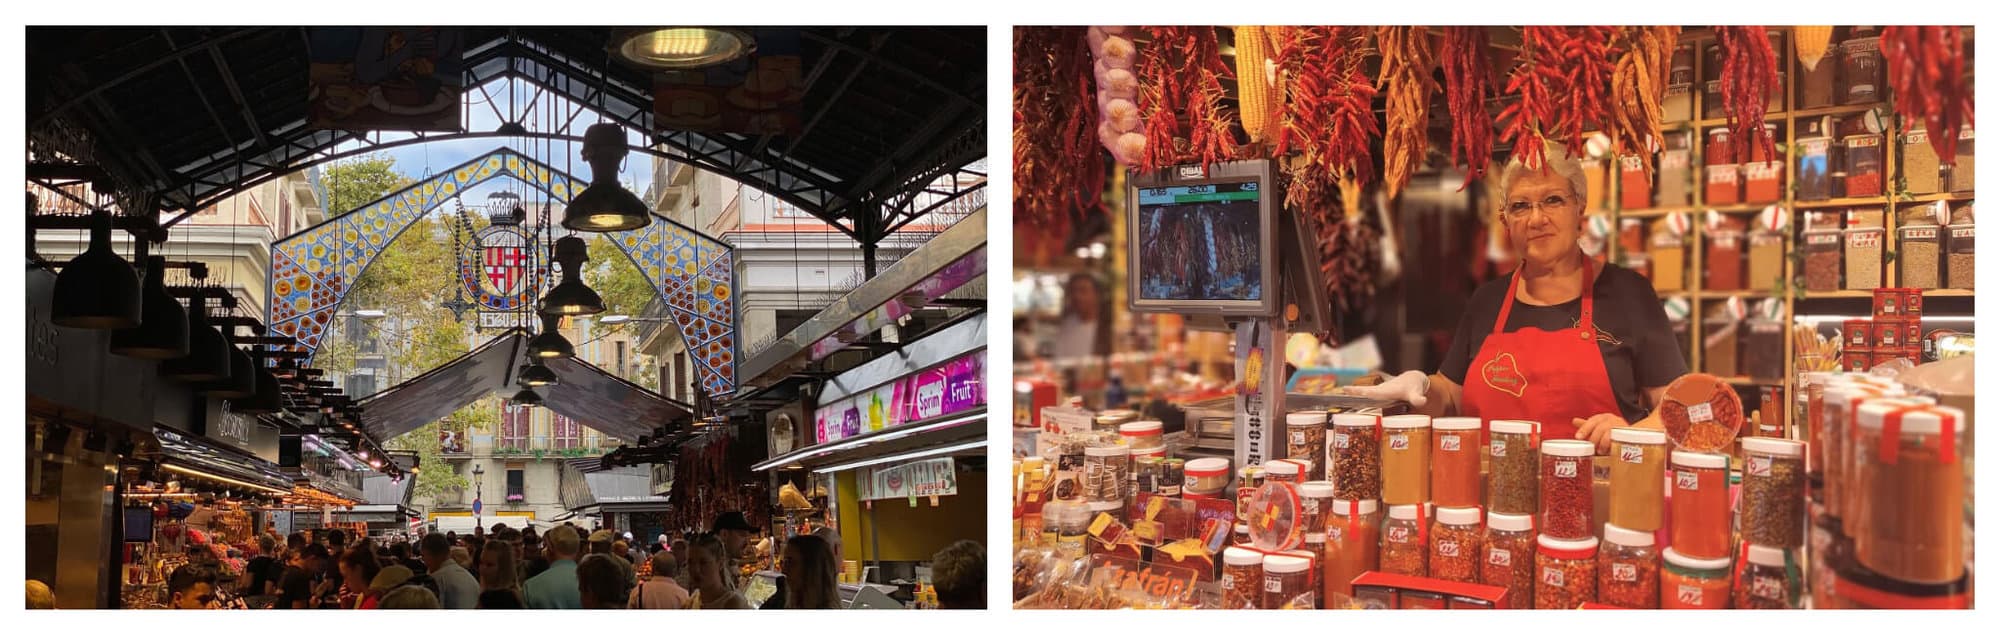 
Left: The Boqueria market in Barcelona, packed with stores and people. Right: A lady vendor selling spices and dried chillies at Barcelona's Boqueria.